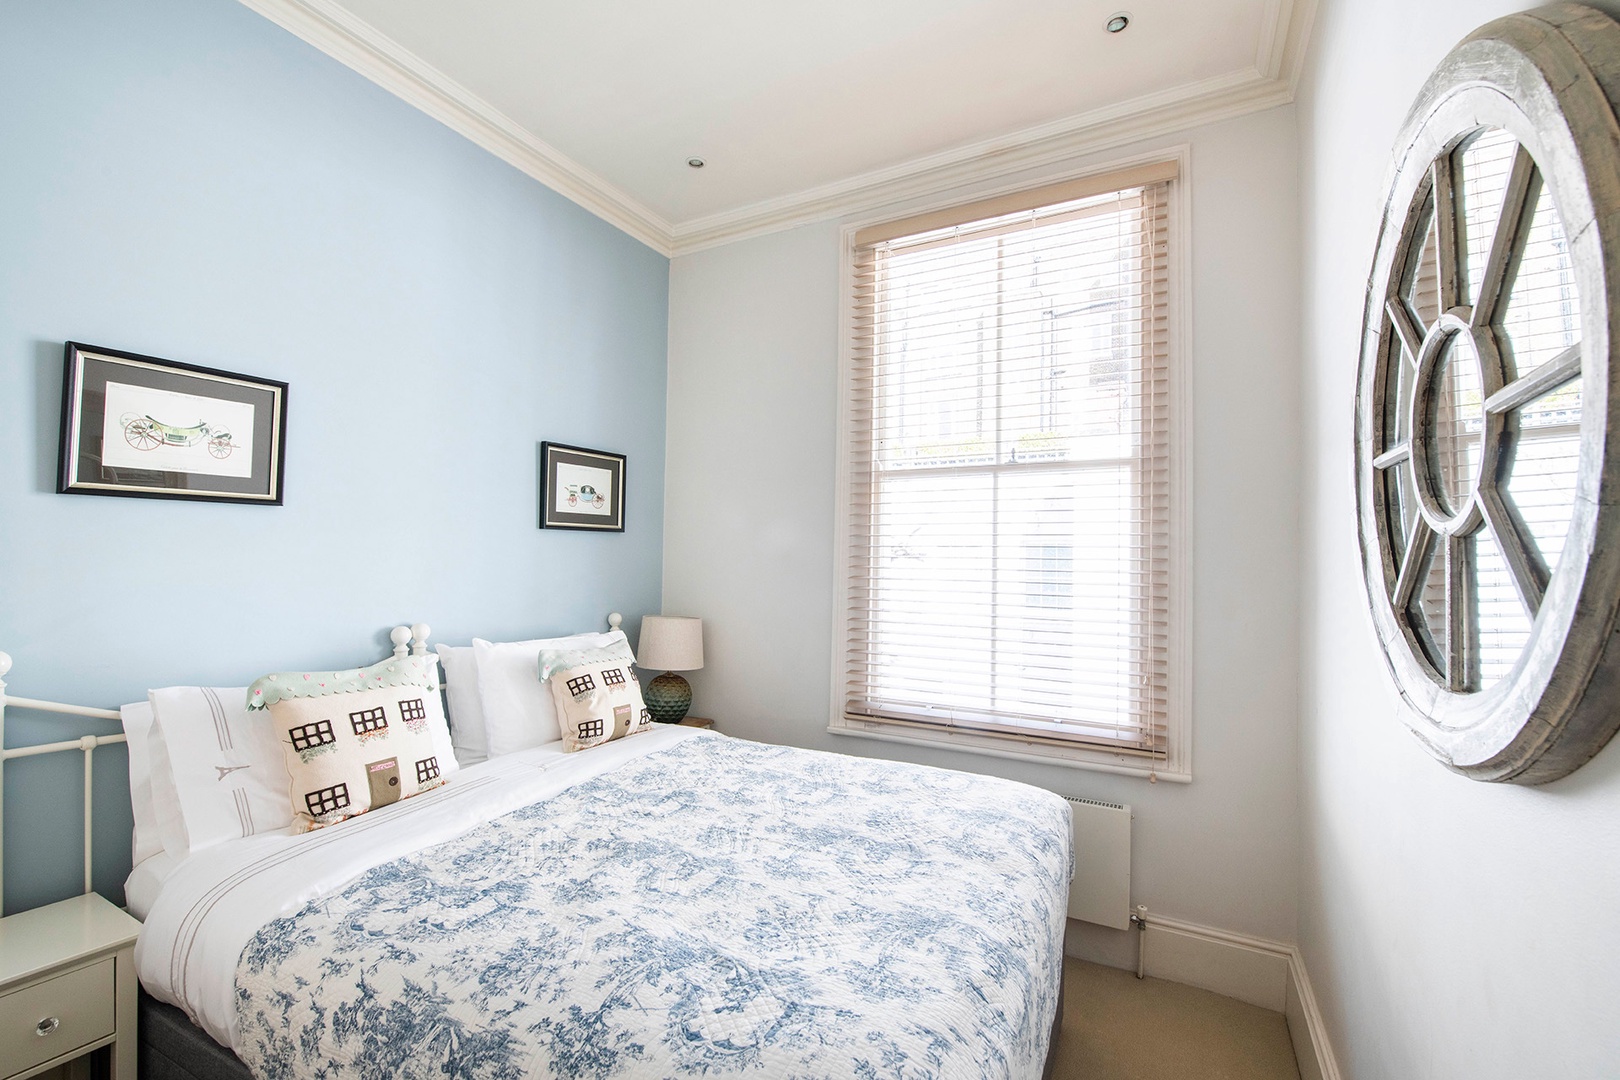 Bedroom 3 with a comfortable bed that can be pushed apart to form two beds and soft shades of blue